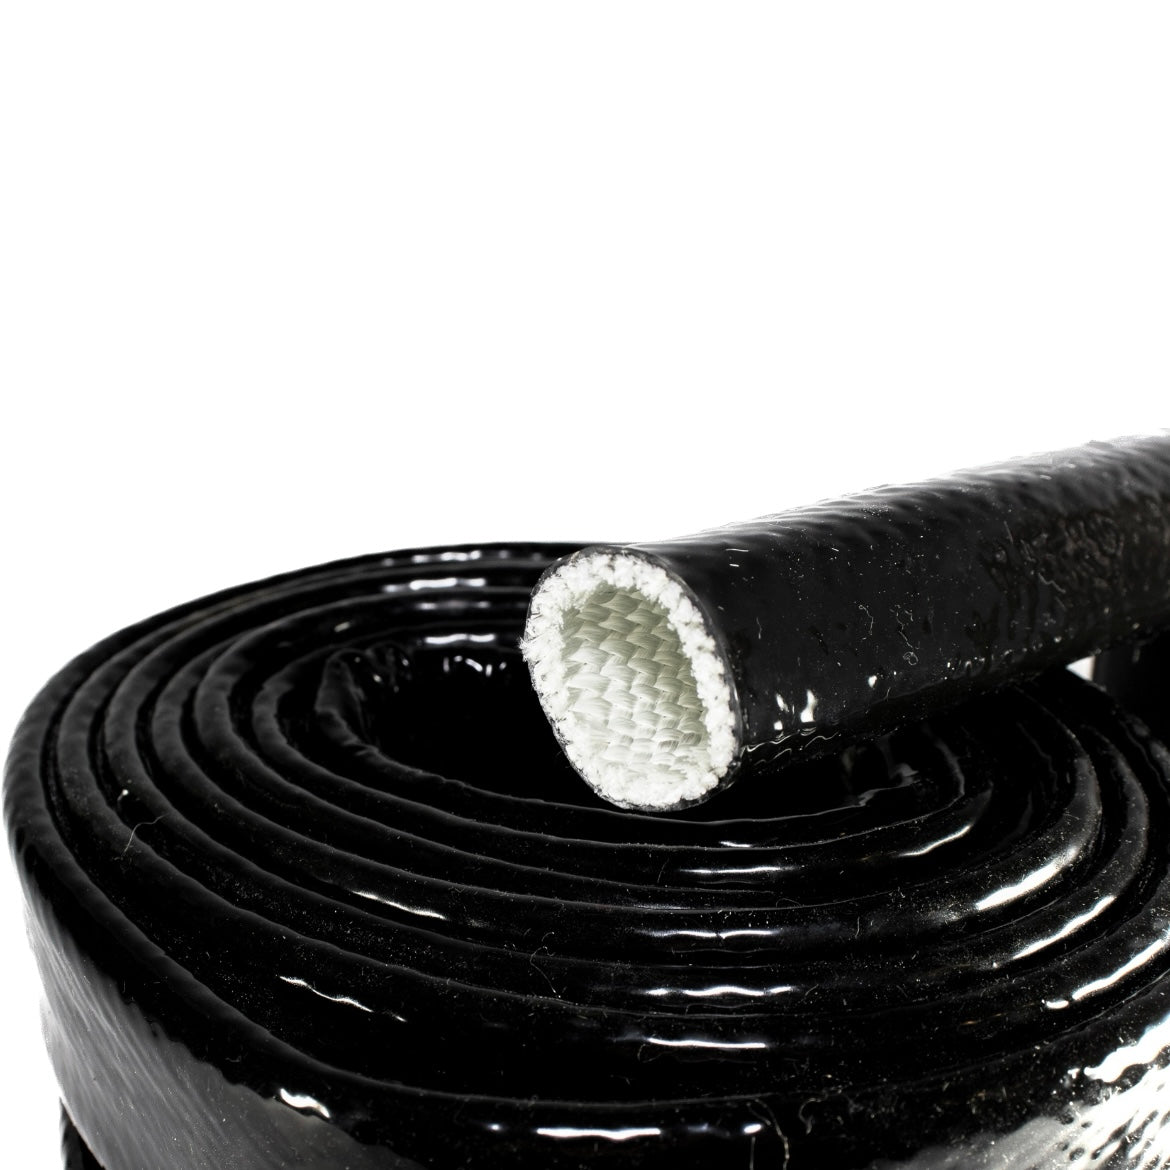 Fire Sleeve Silicone Fiberglass Heat Protection for Hoses and Wires